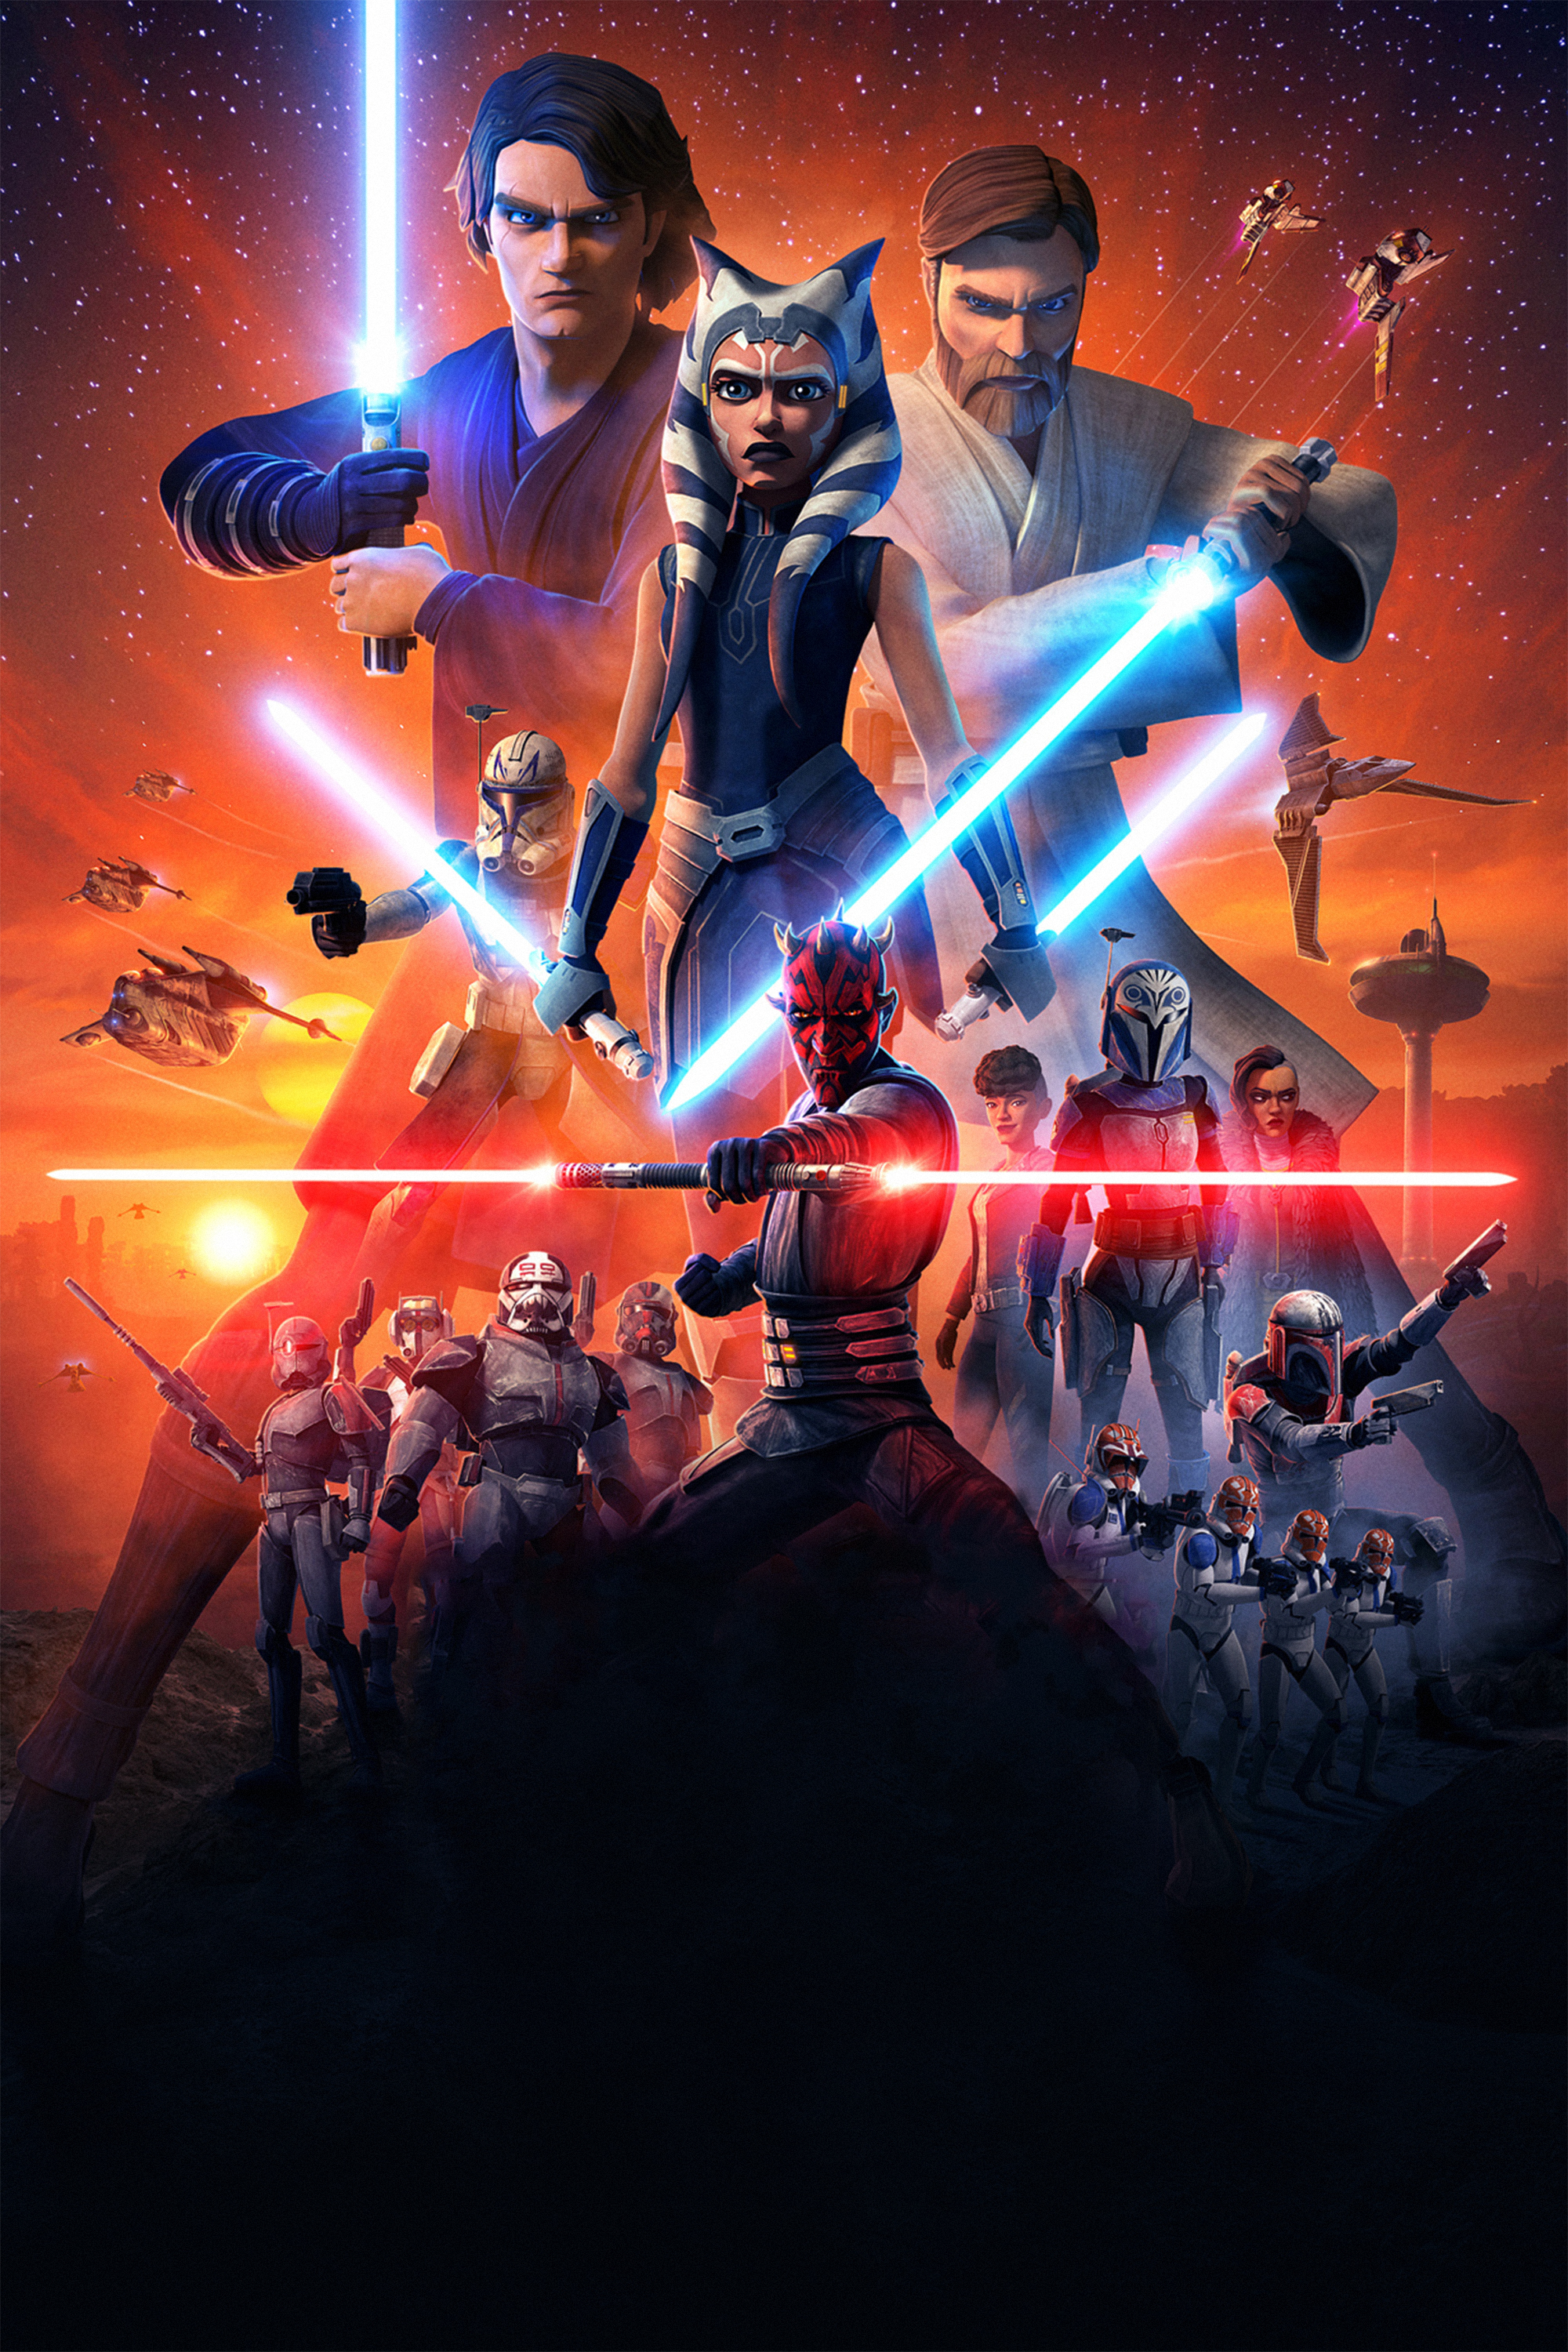 The Clone Wars Wallpaper Hd Tv Series 4k Wallpapers Images Photos And Background